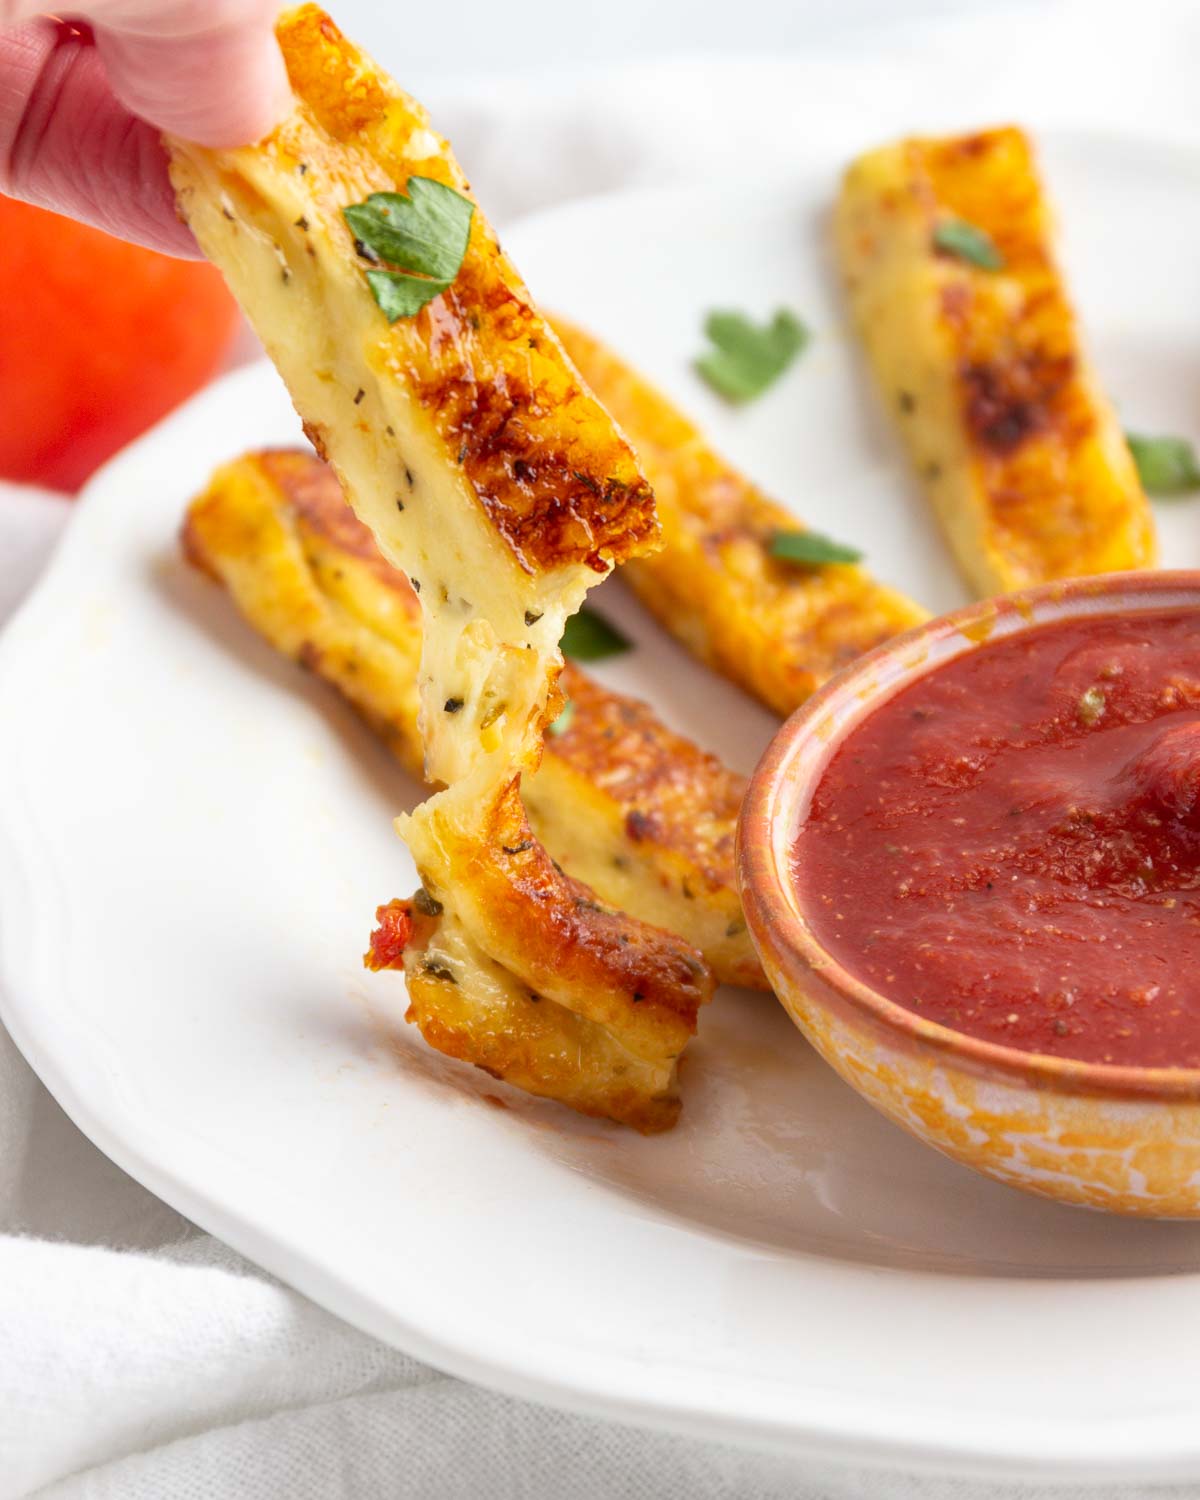 A pizza fried cheese stick abut to be dipped in sauce.